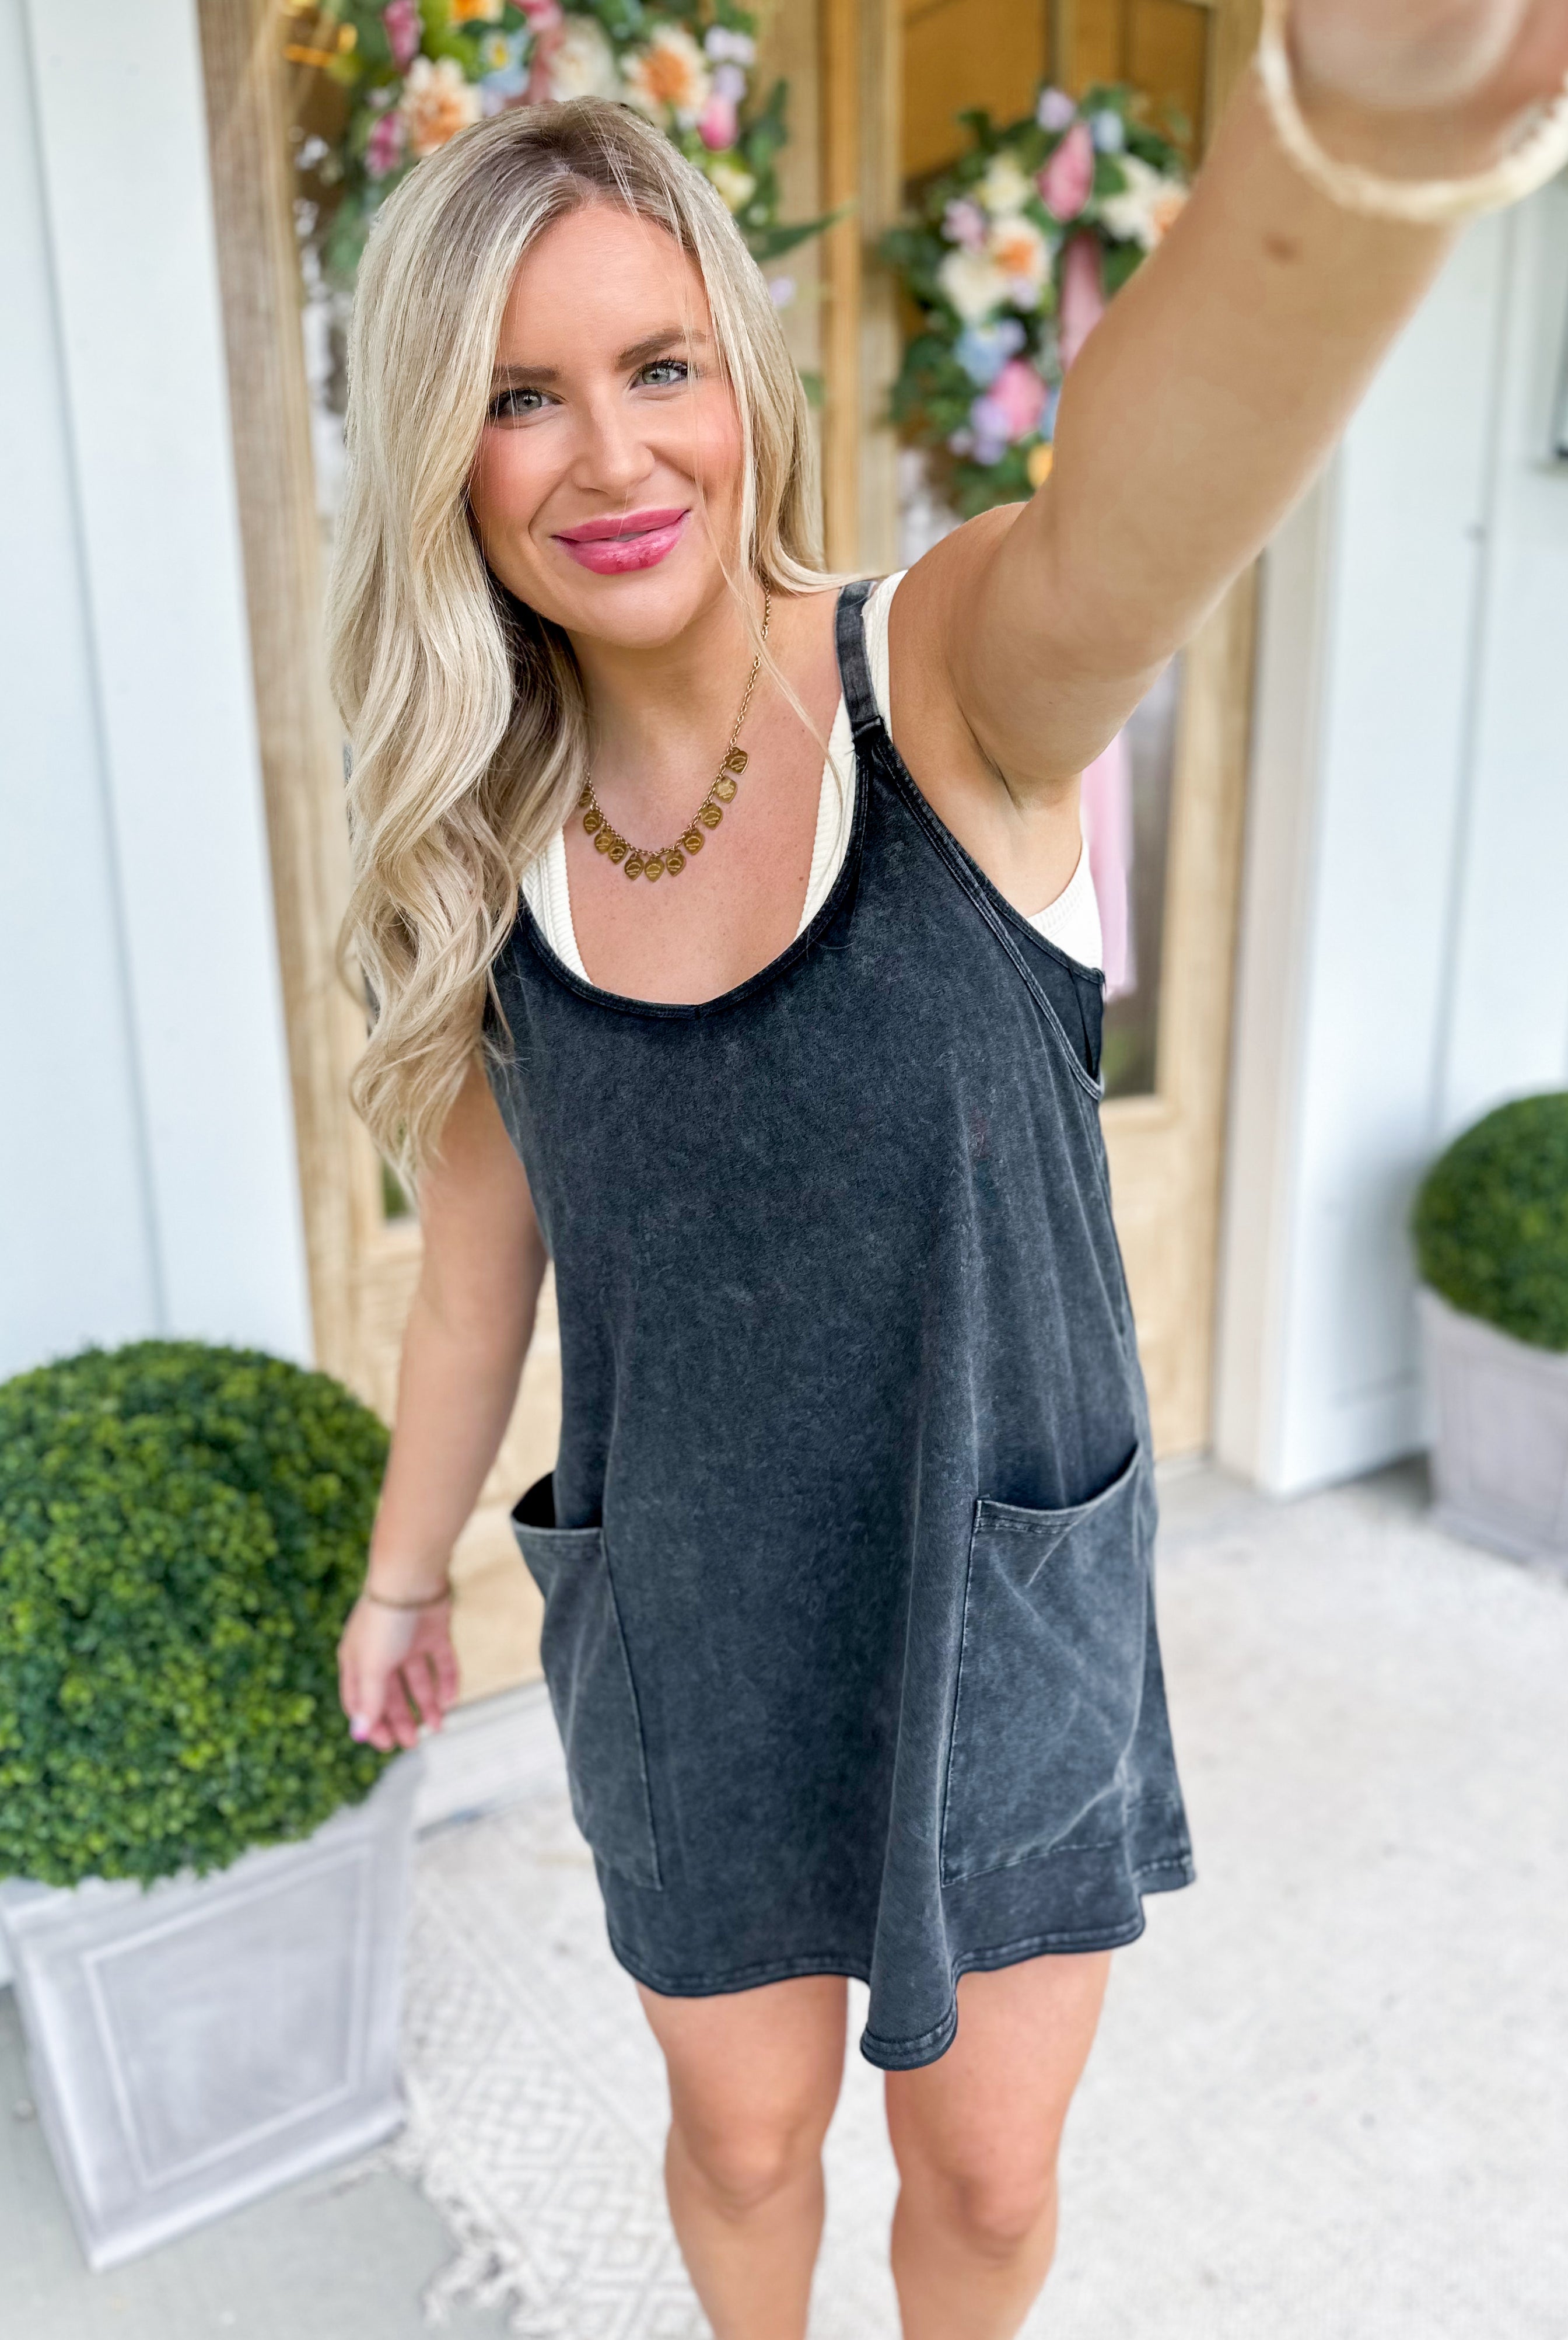 Oliva Washed Cotton Dress with Attached Onsie - Be You Boutique